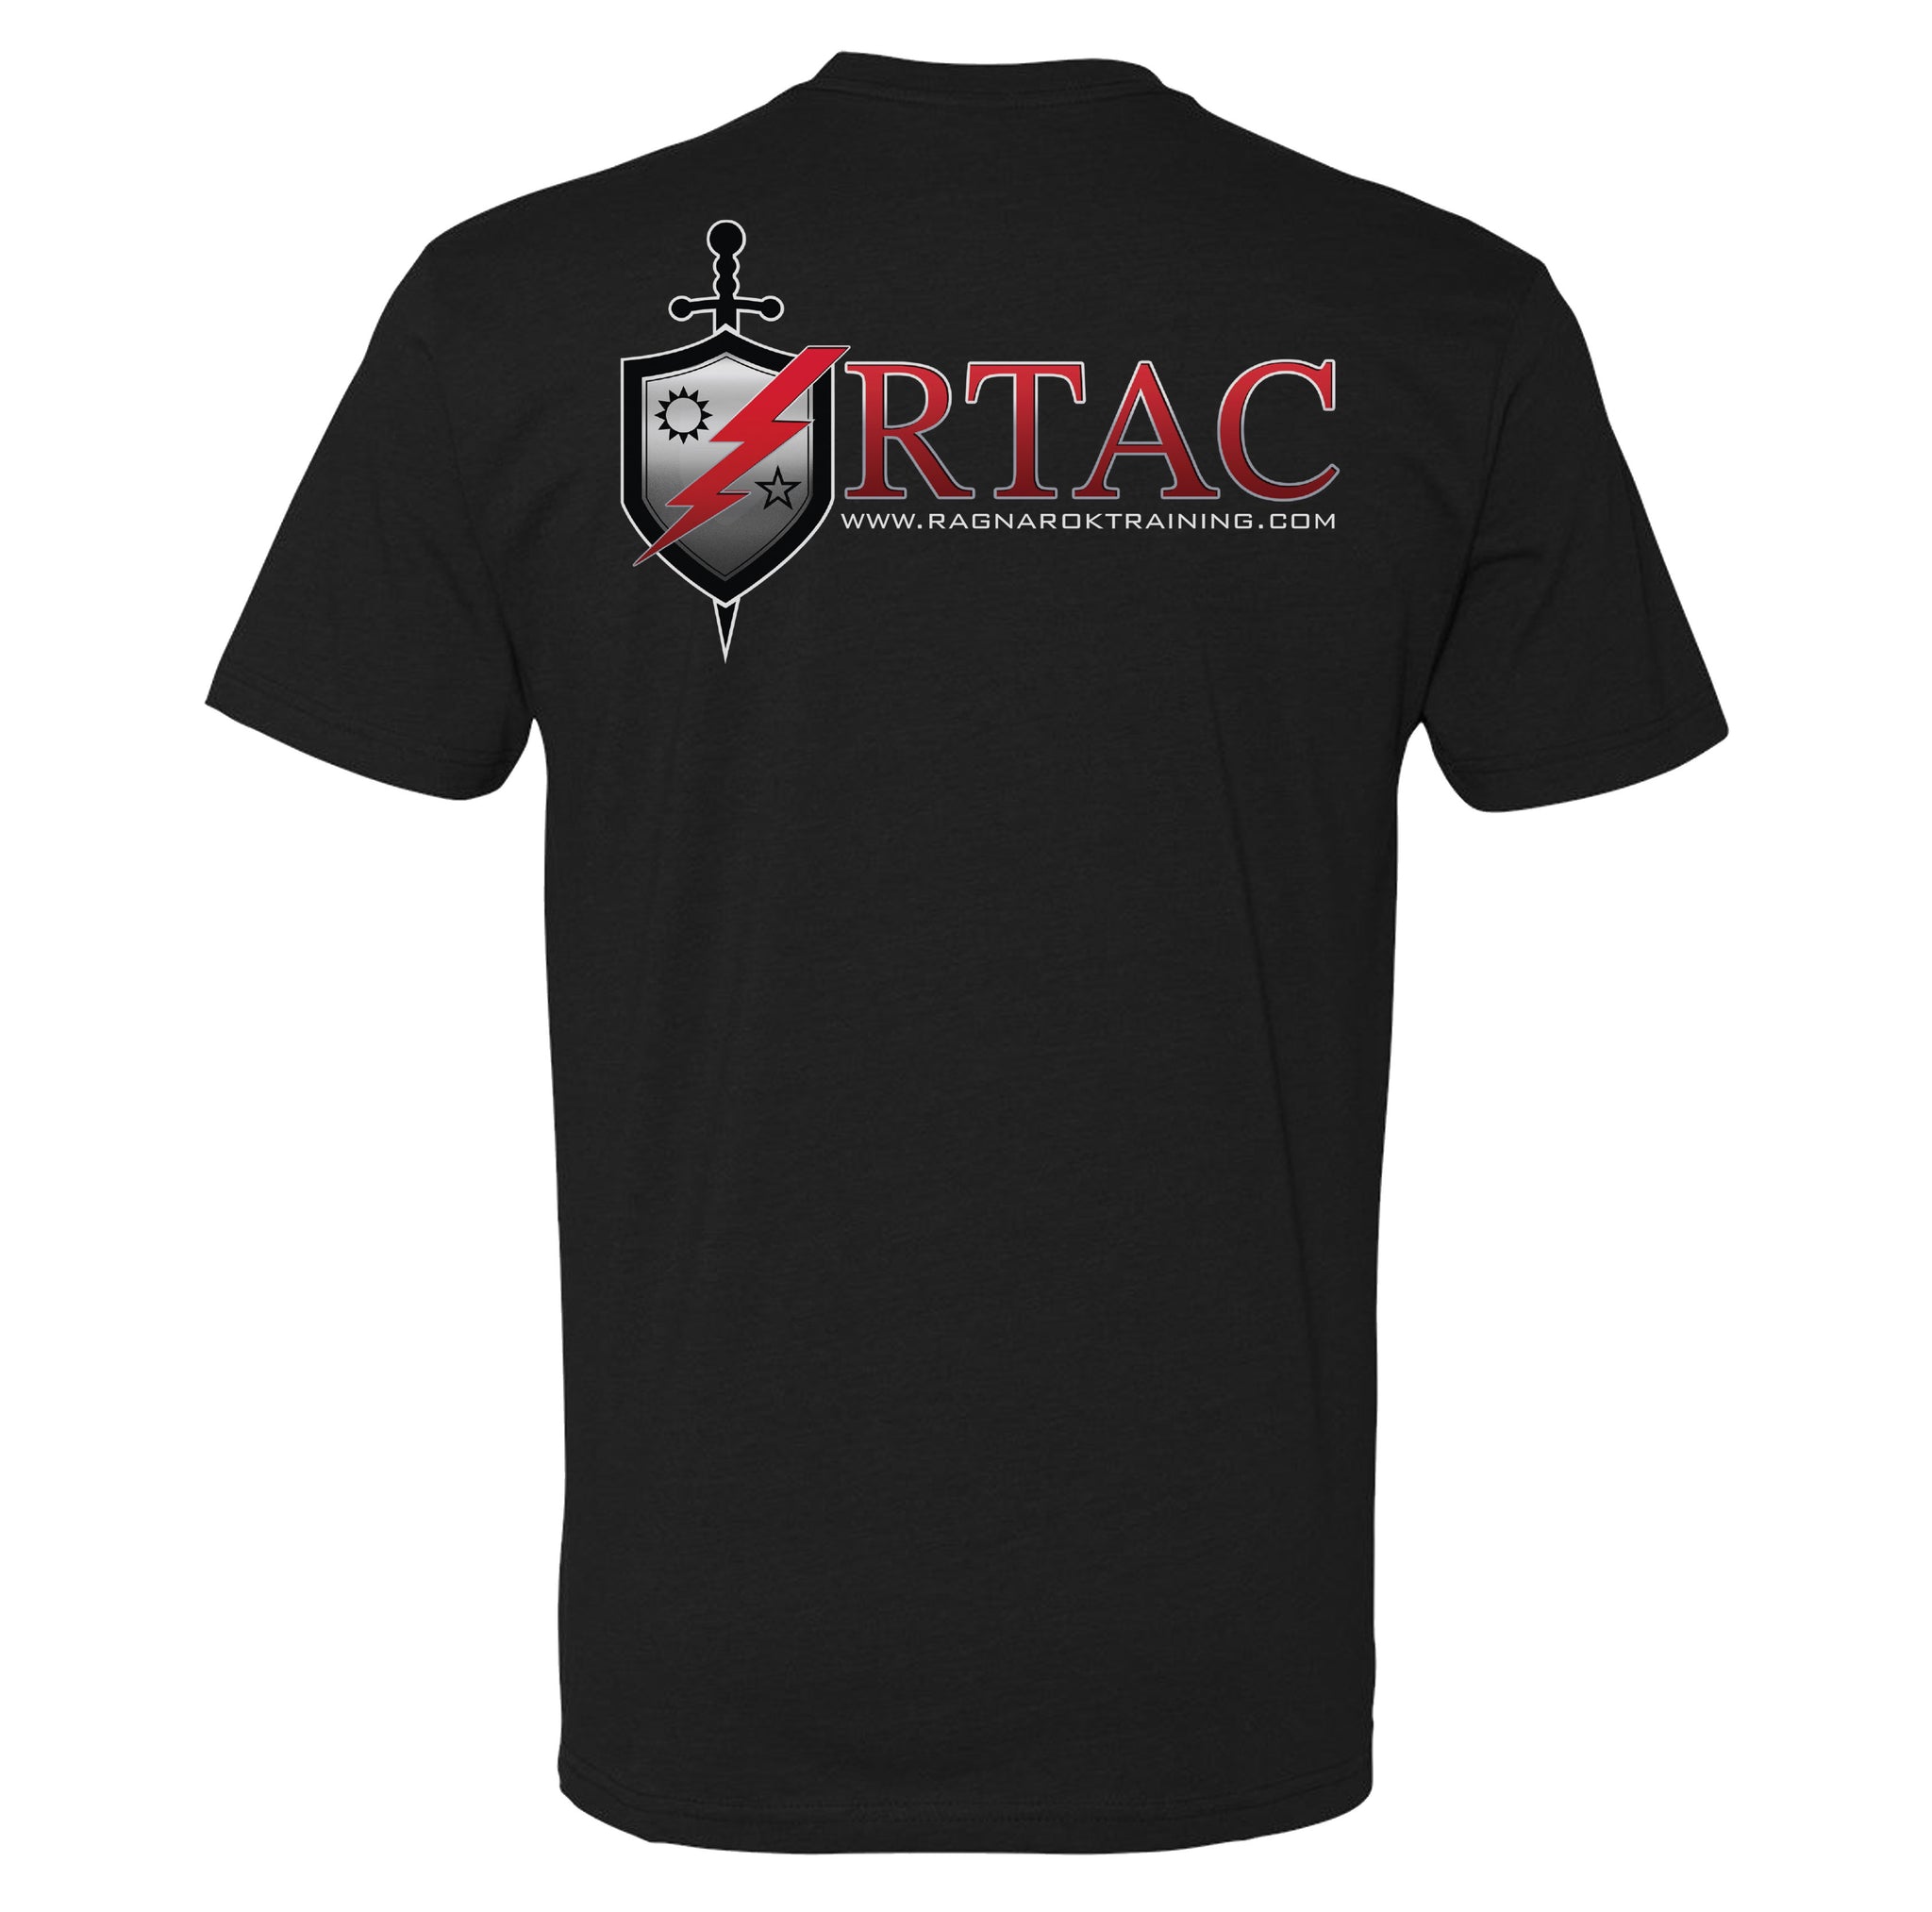 RTAC Consulting Tee